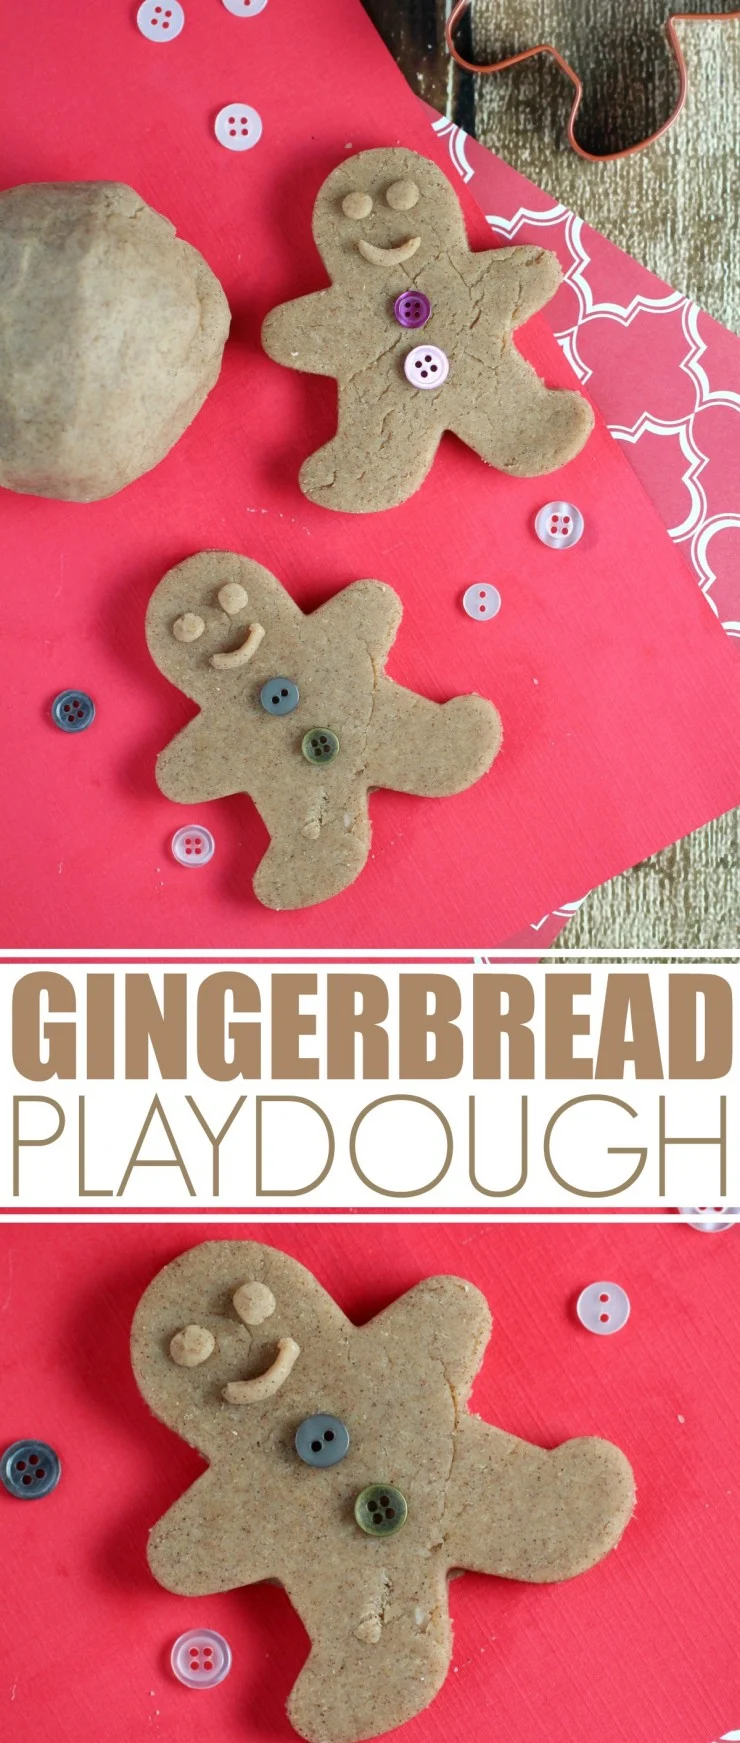 This Gingerbread Playdough recipe is not only edible, it also smells great too! Kids will love playing with this fun scented homemade playdough!